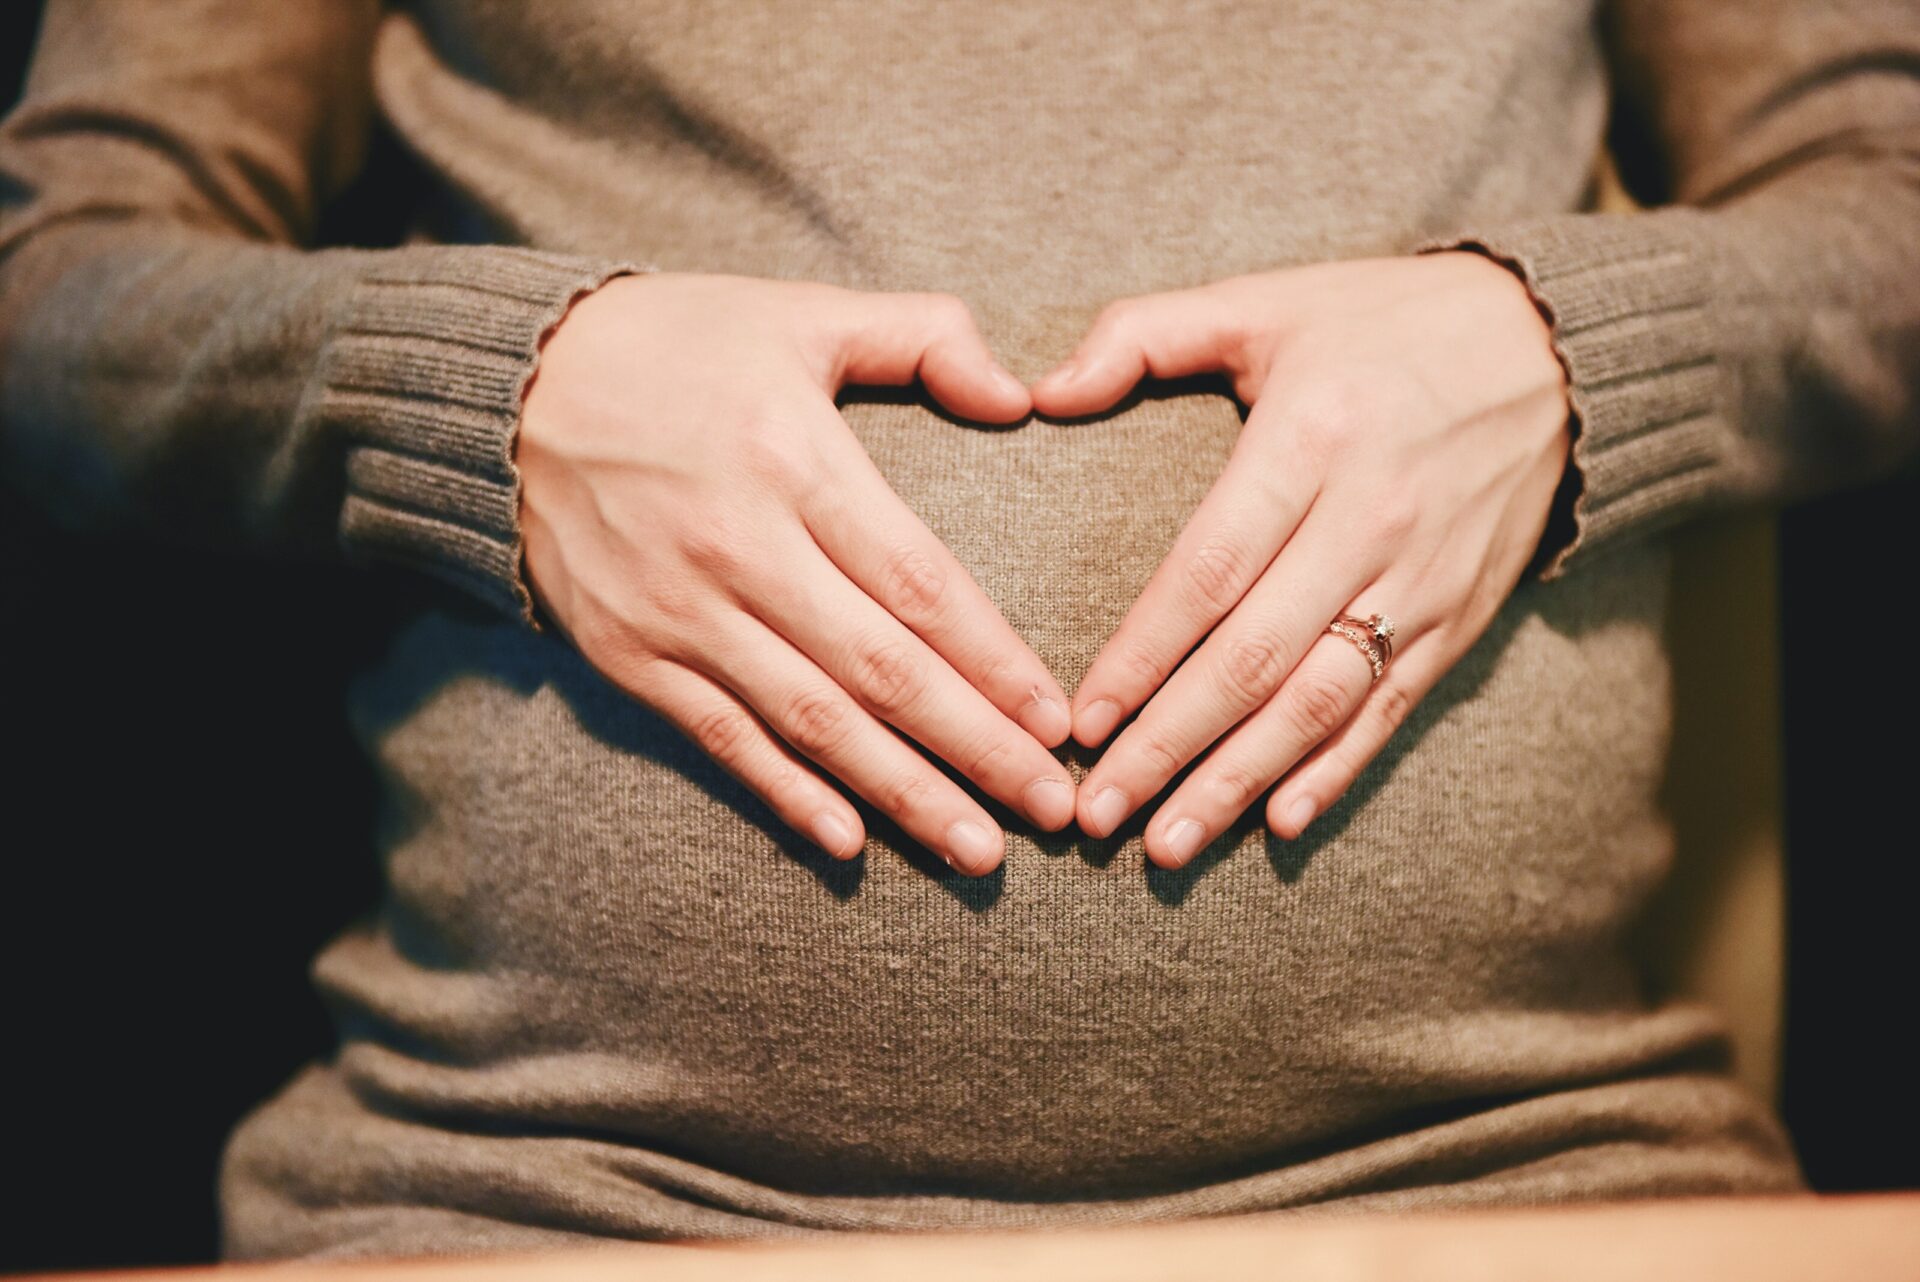 dental work during pregnancy, Closeup of a pregnant belly with the mom's hands in a heart shape